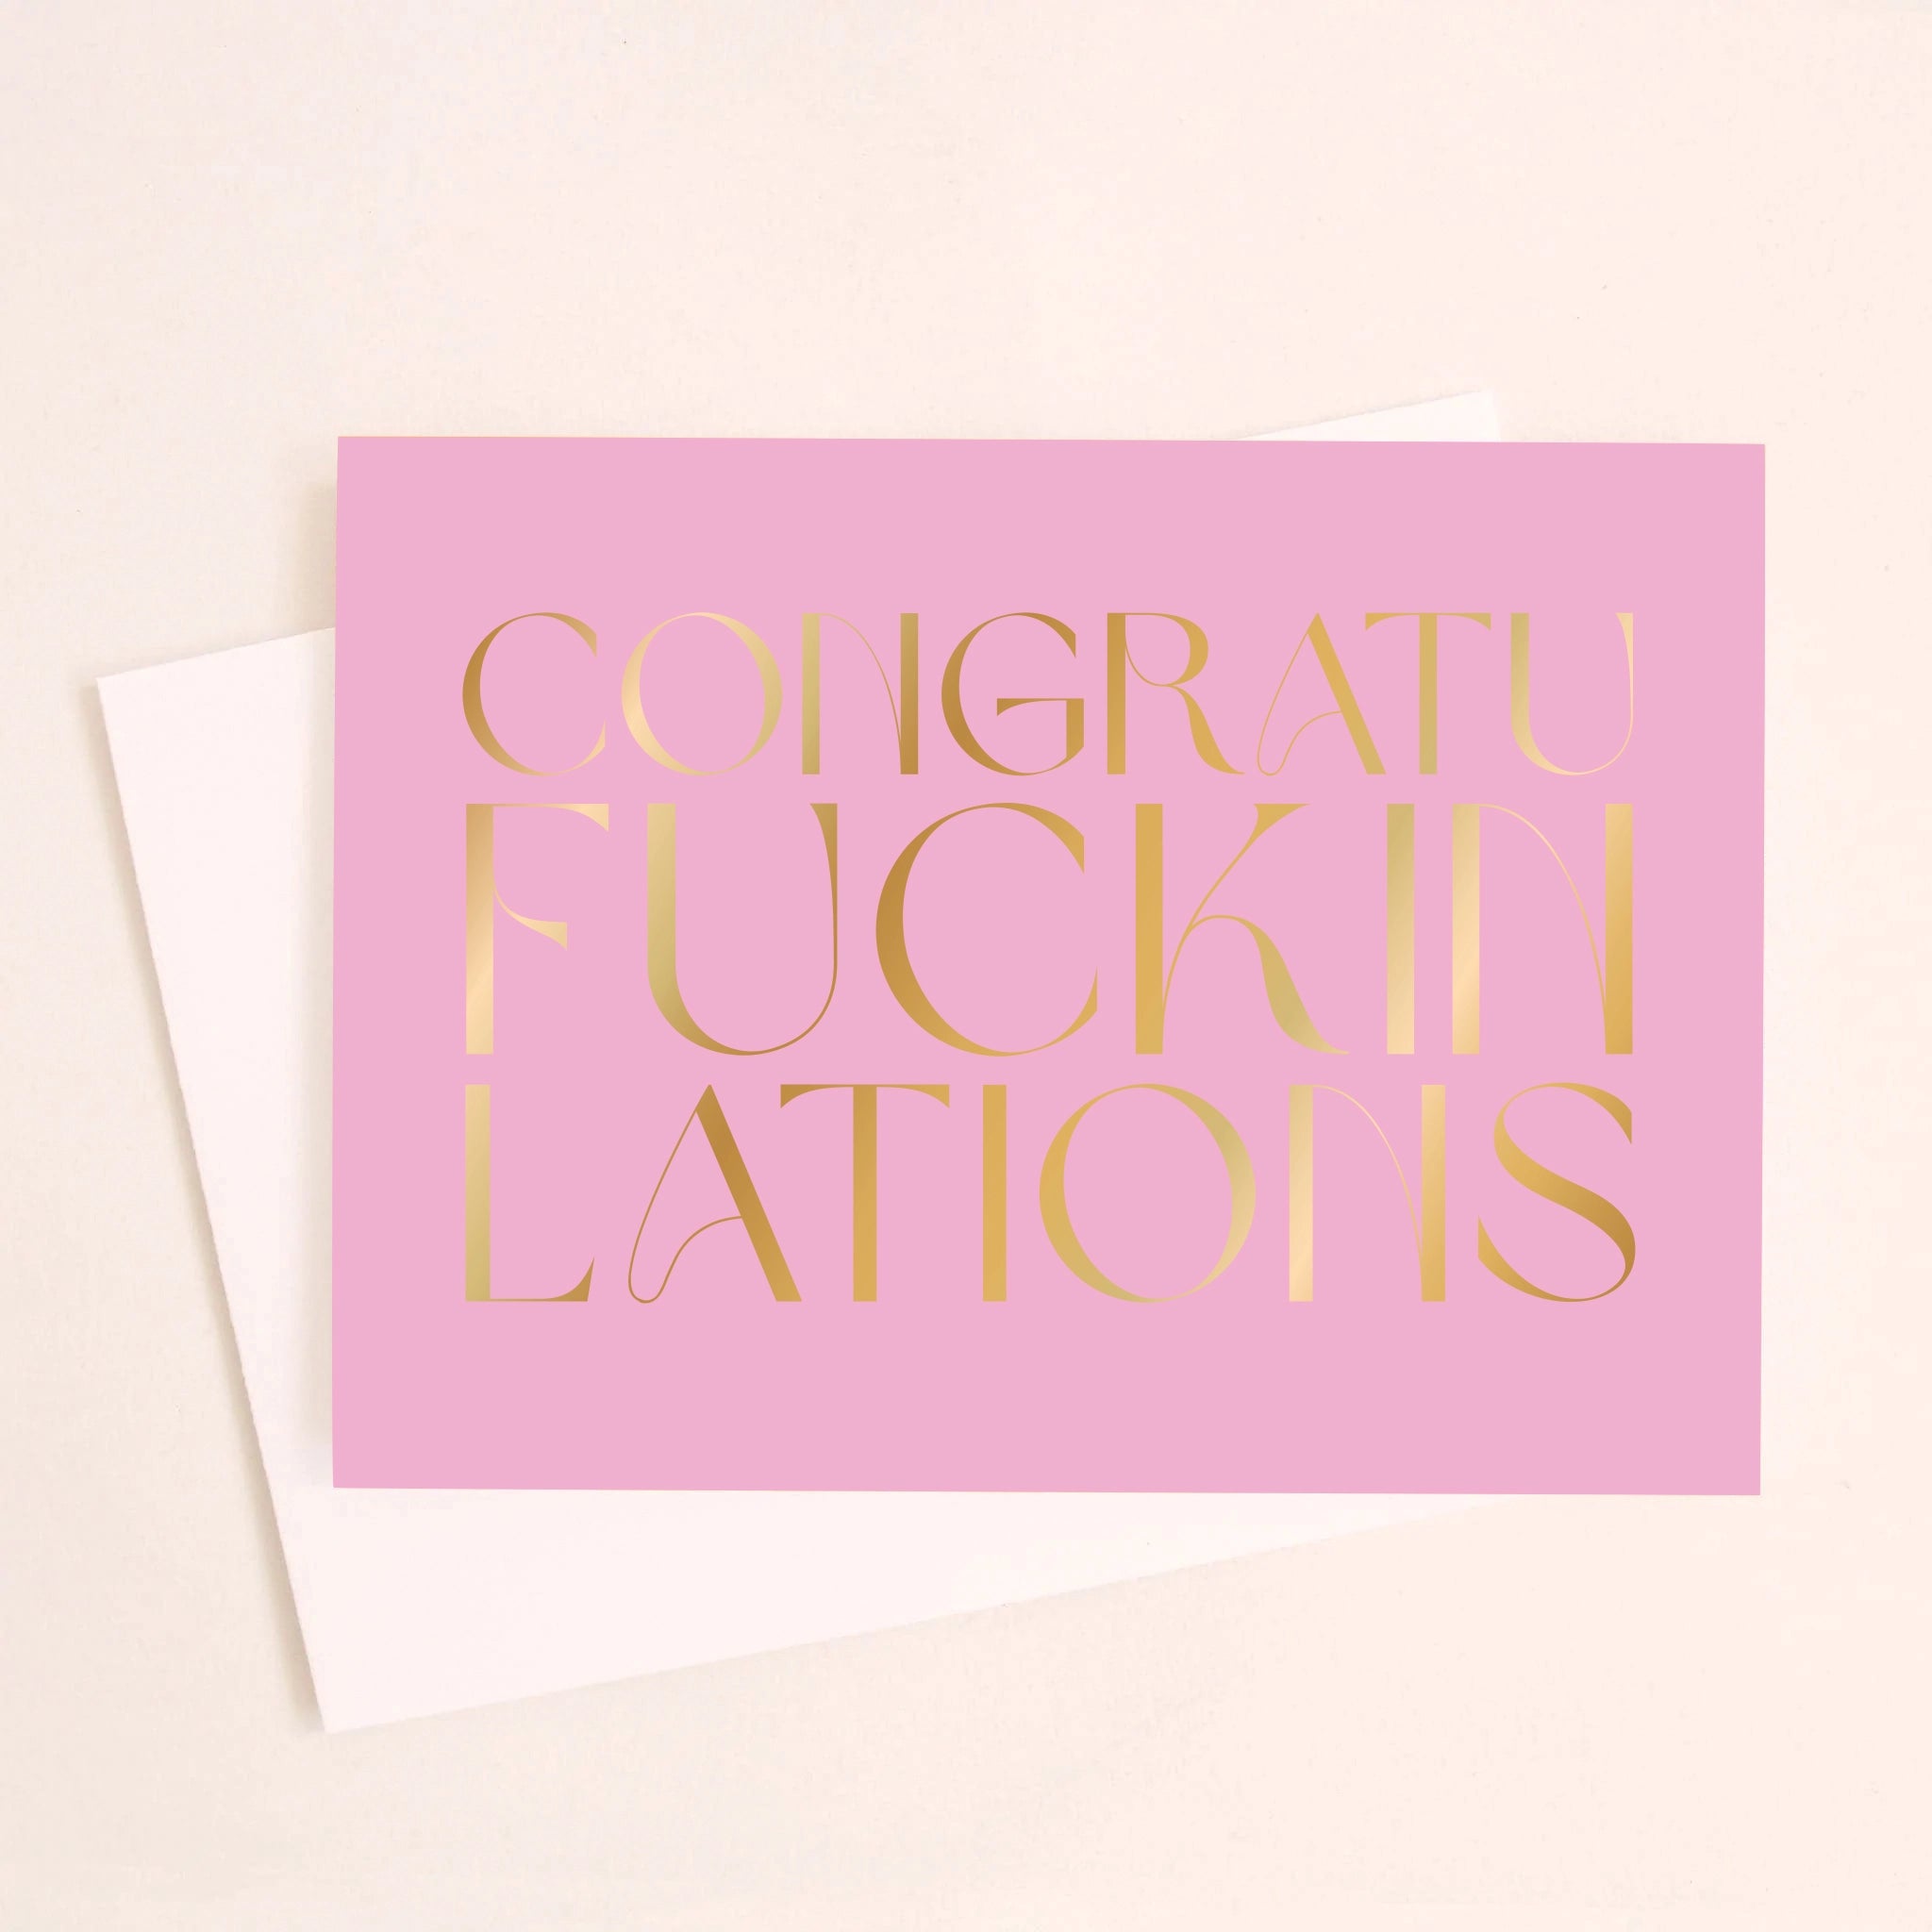 On an ivory background is a purple pink greeting card with gold foil text that reads, "Congraufuckinlations".